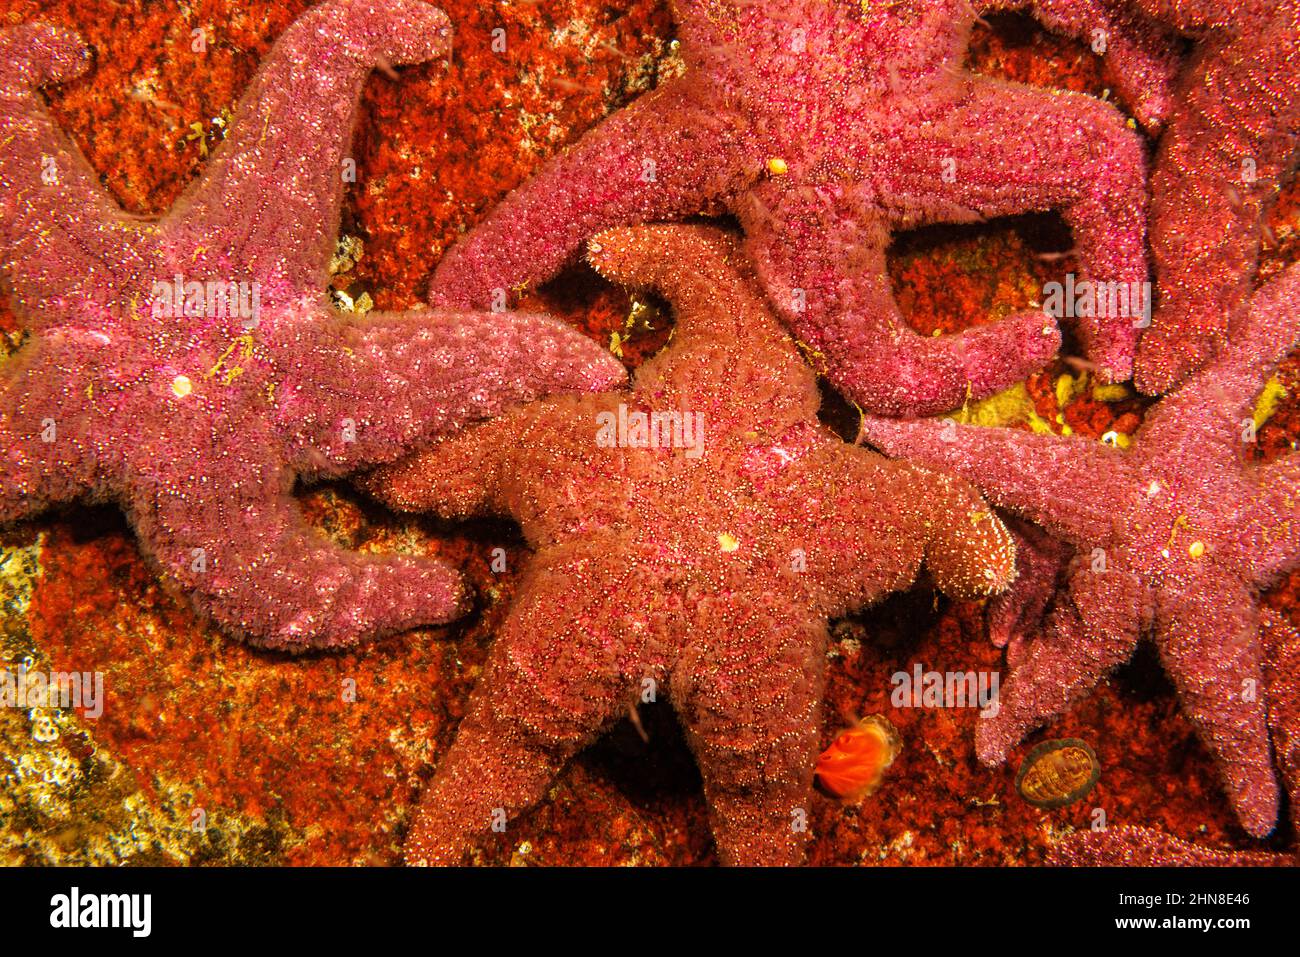 A group of ochre sea stars, Pisaster ochraceus, British Columbia, Canada. A disease-associated die off known as the Sea Star Wasting Syndrome has made Stock Photo